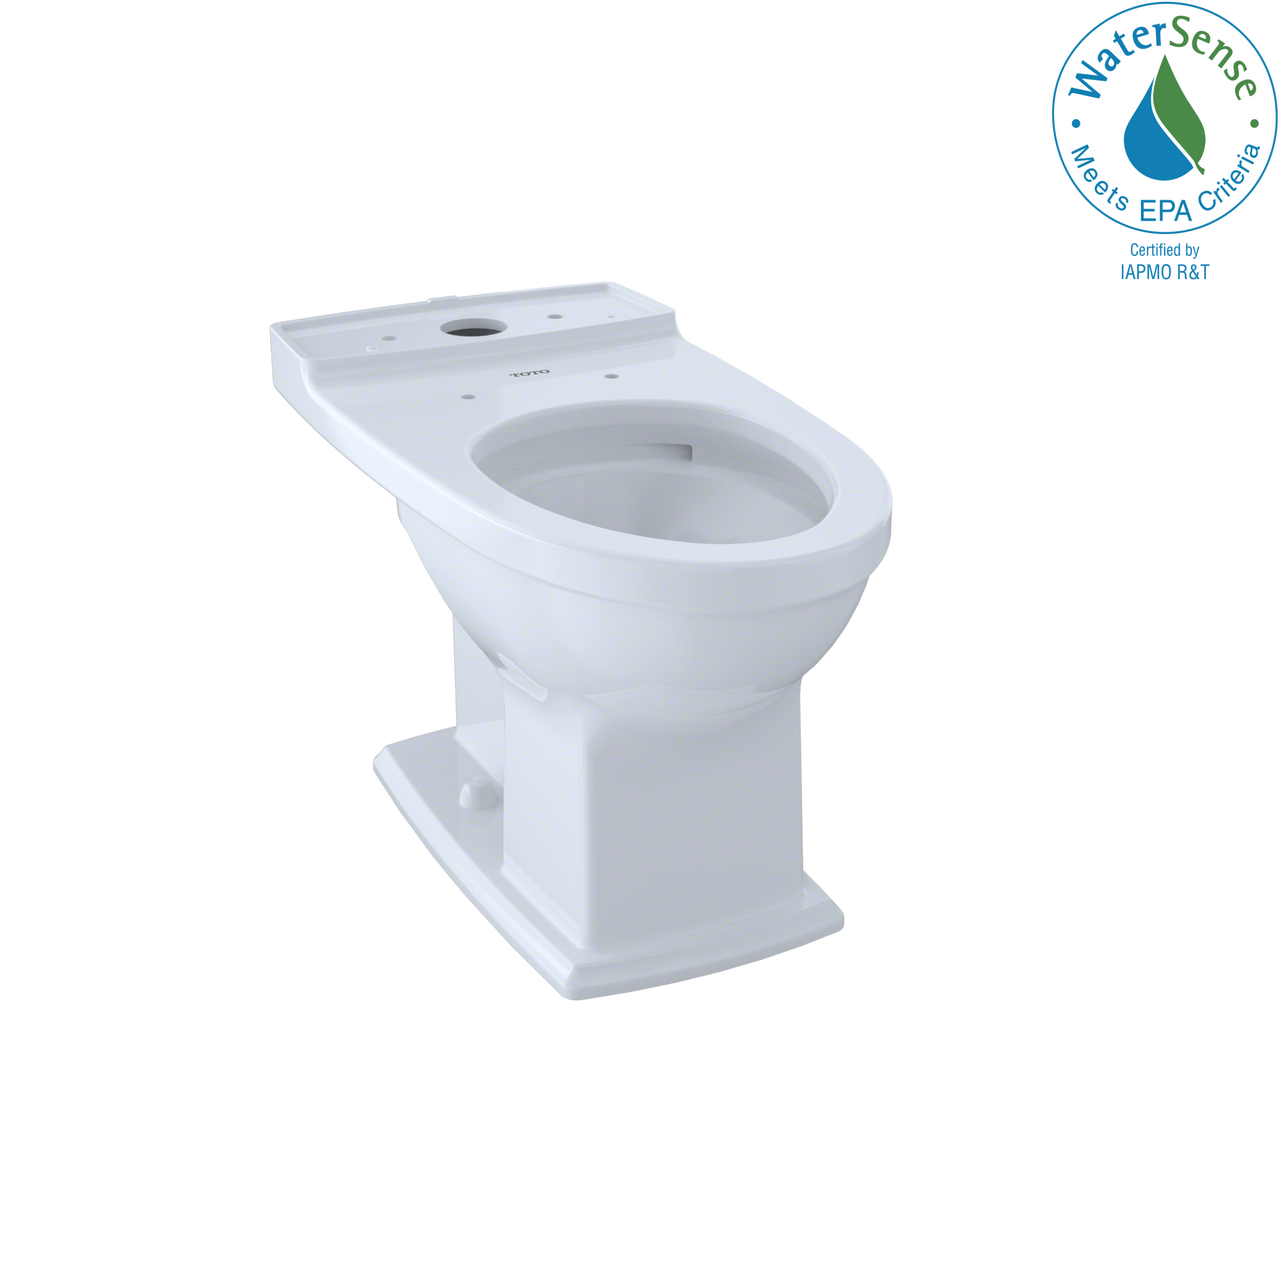 TOTO Connelly Universal Height Elongated Toilet Bowl with CeFiONtect,  - CT494CEFG#01 - BNGBath